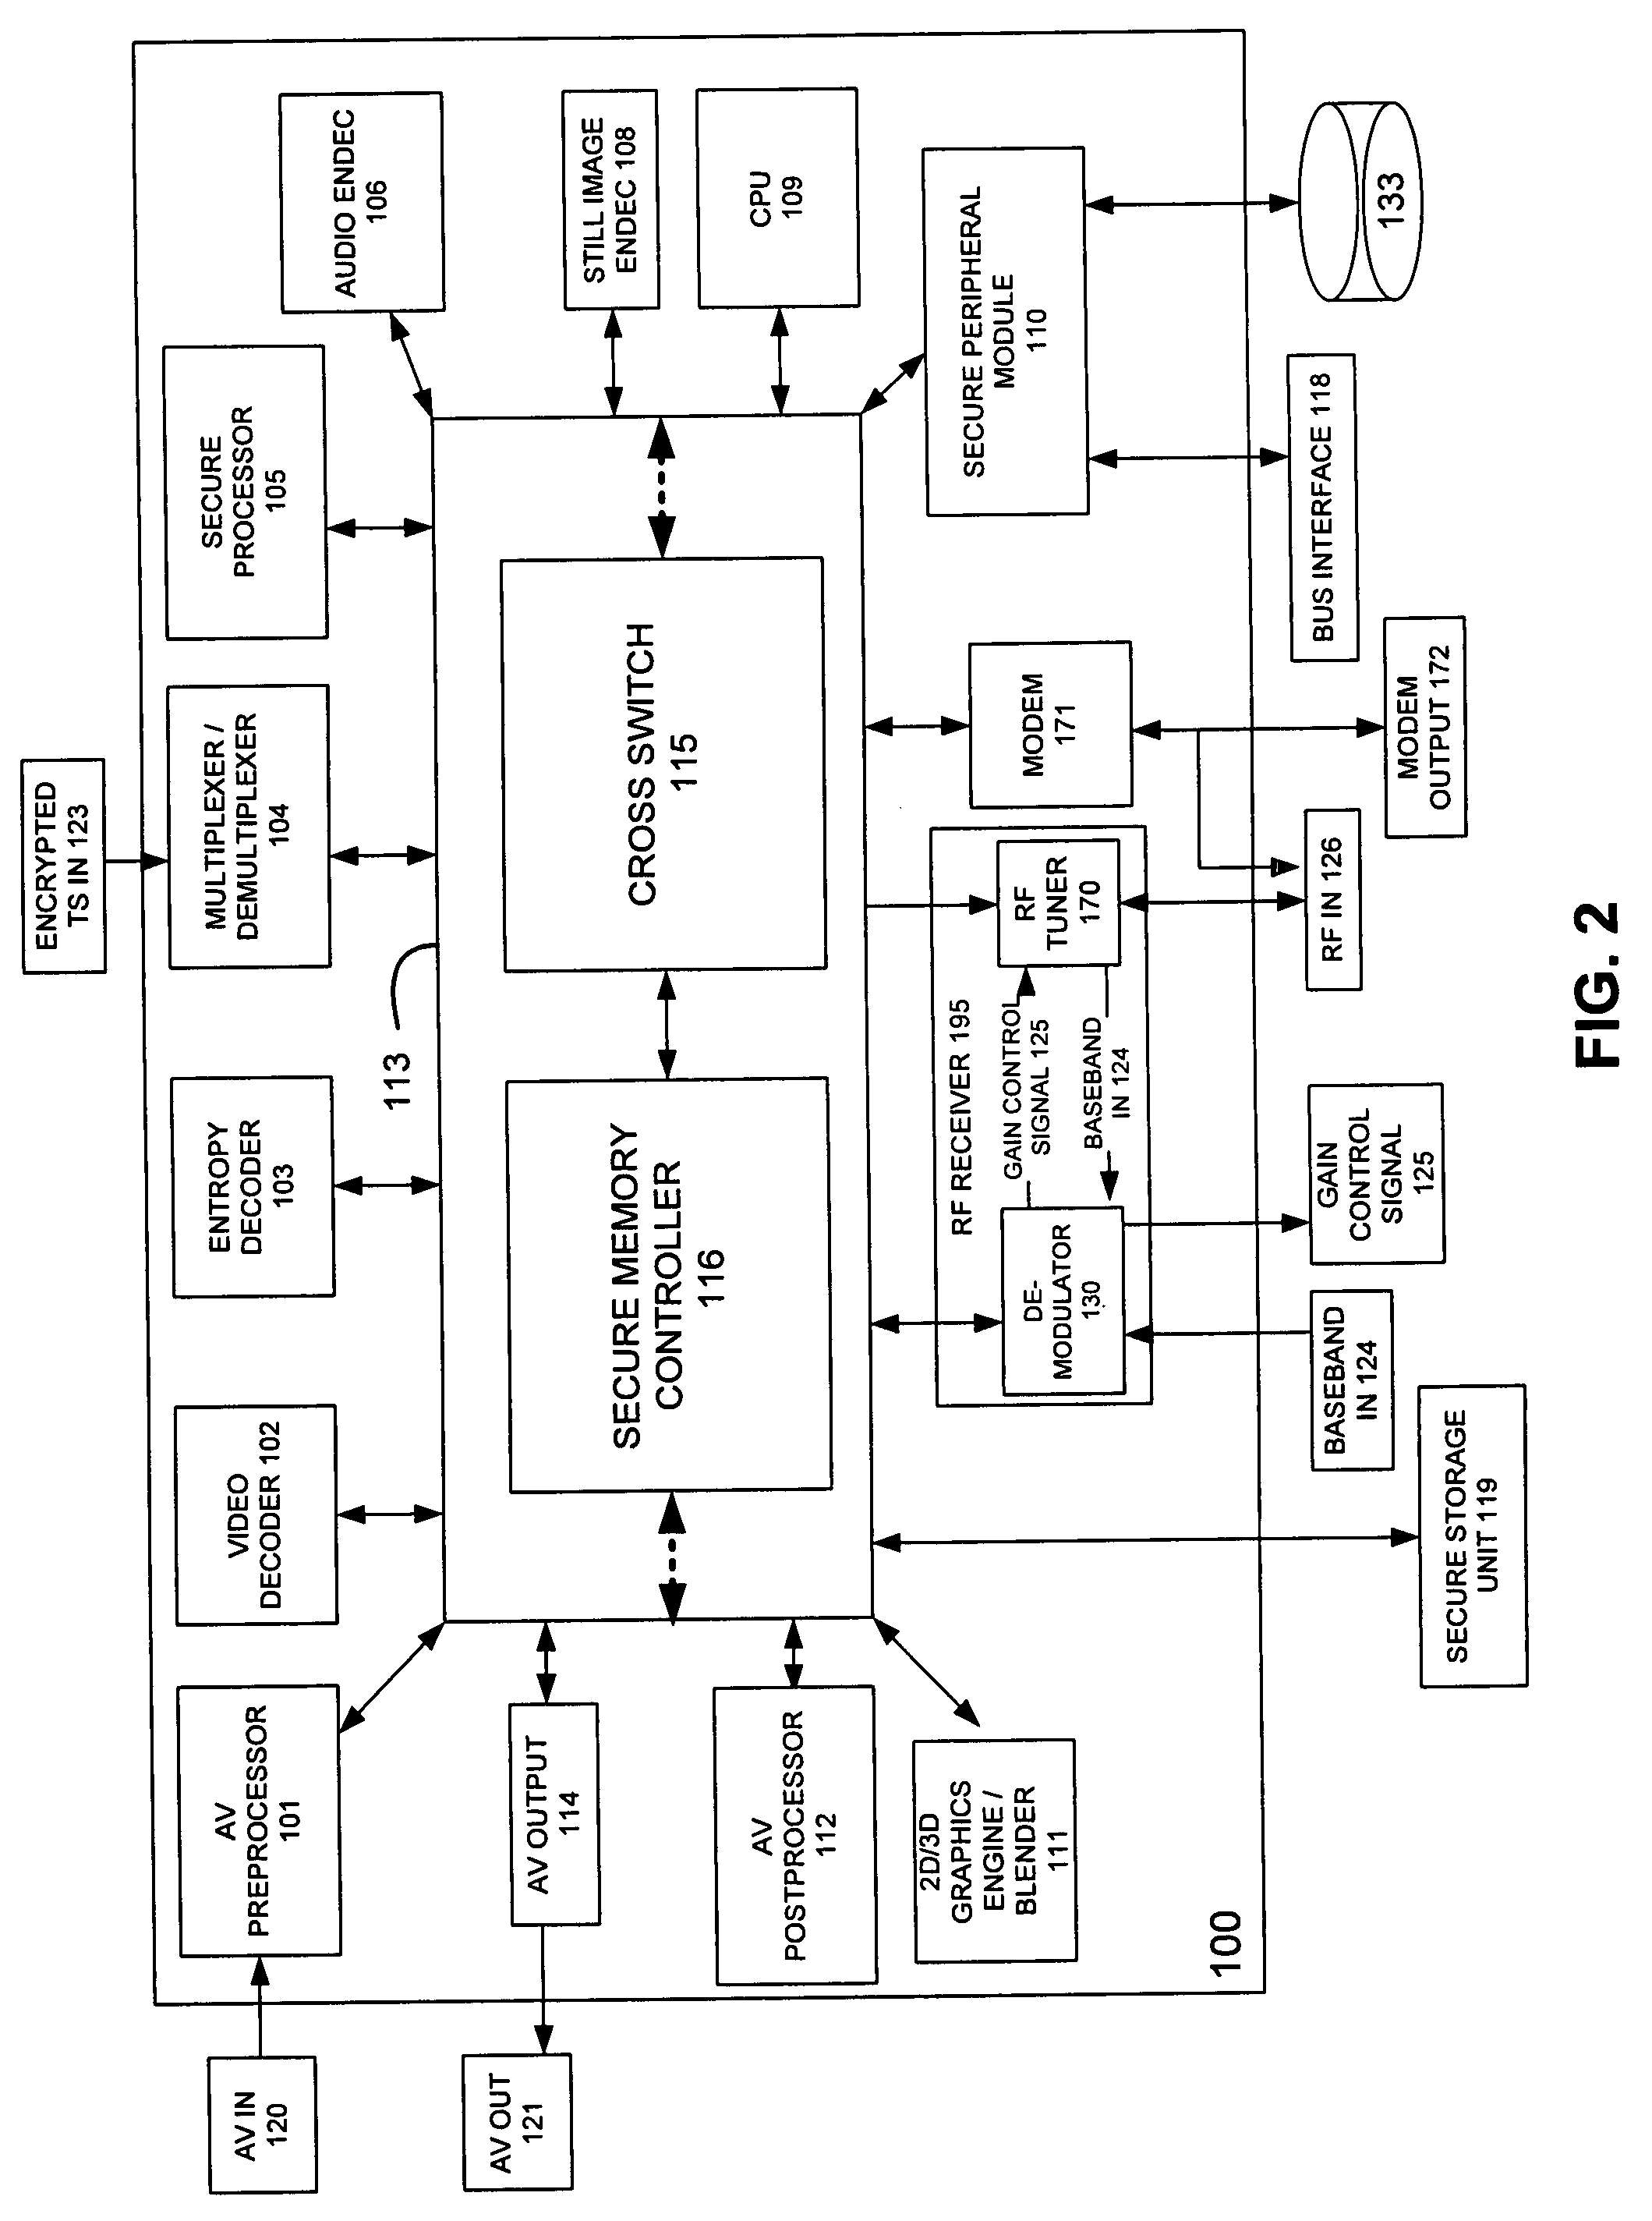 Media processor with an integrated TV receiver